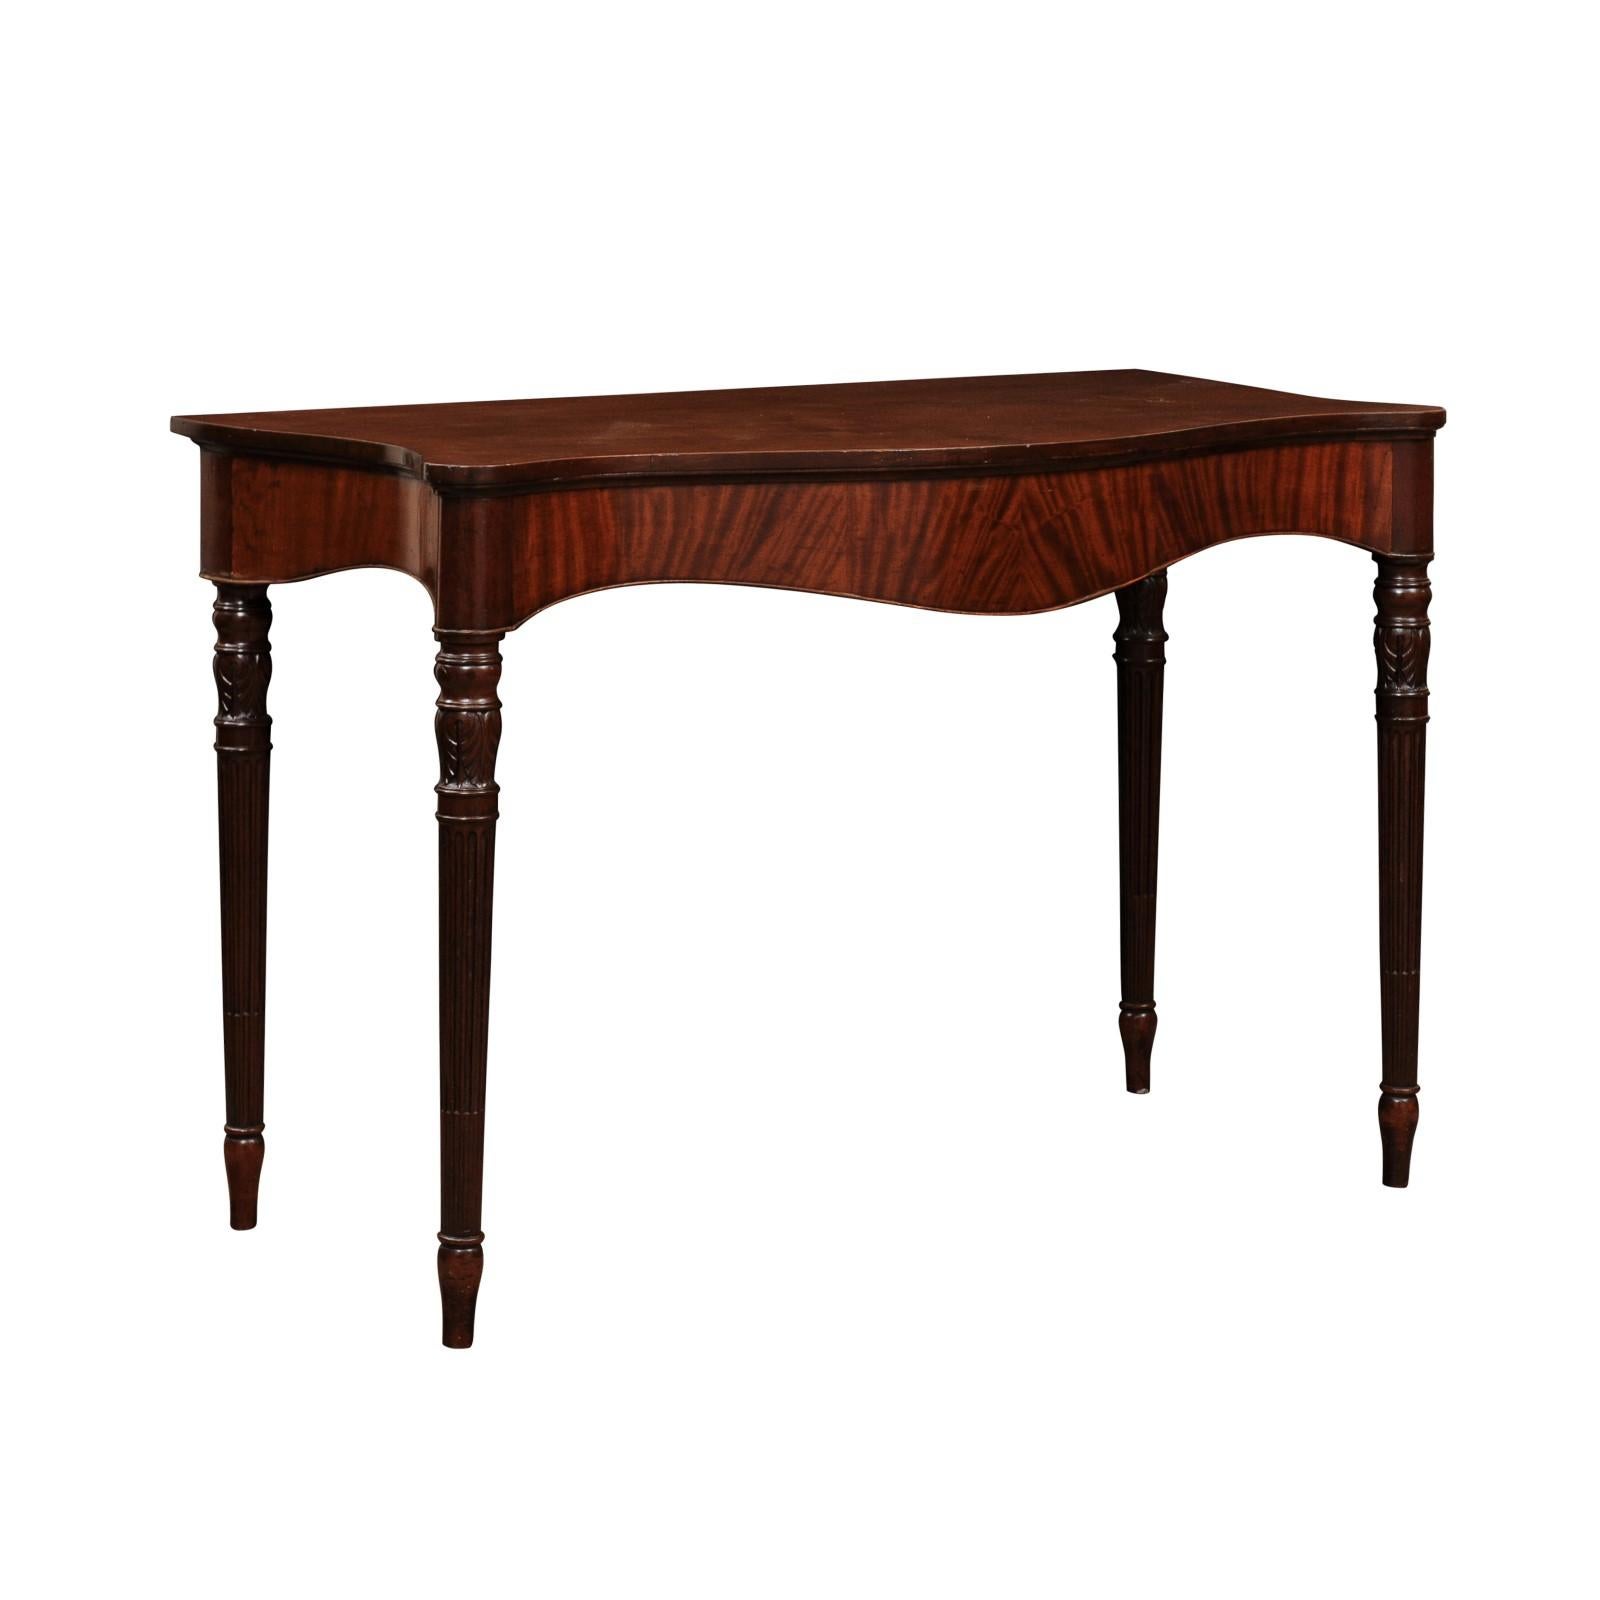 English George III Early 19th Century Serpentine Server in Mahogany with Turned Fluted Legs